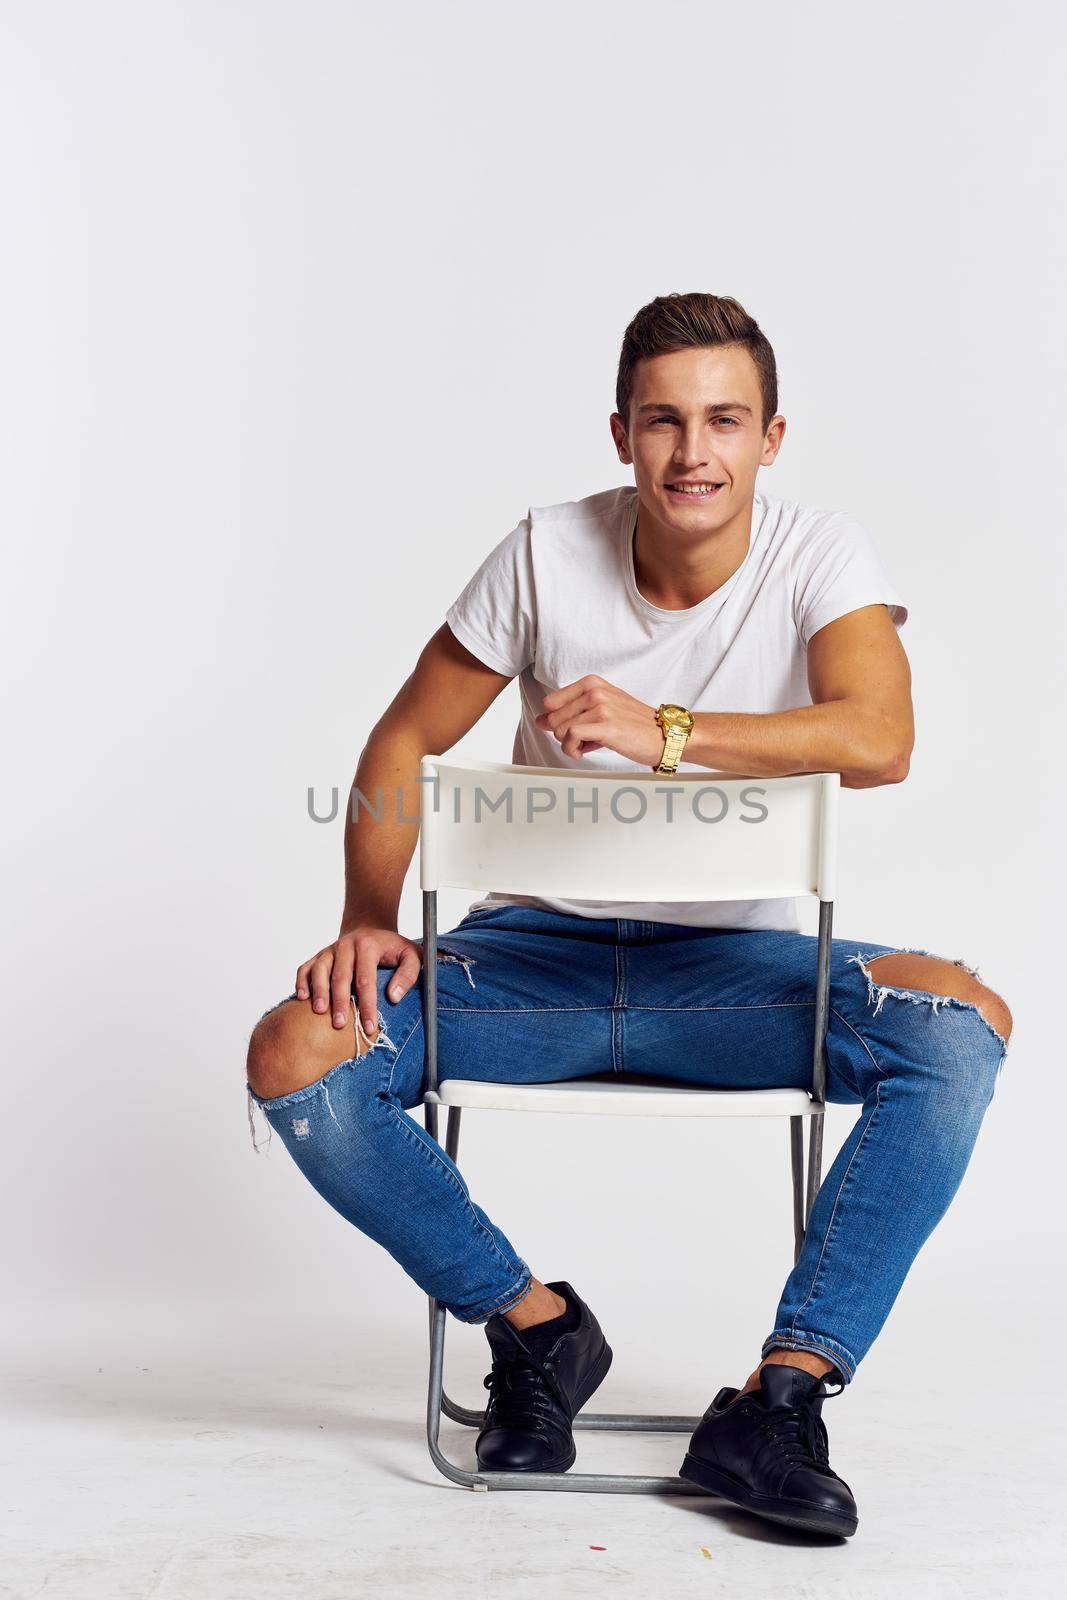 A man in jeans sits on a chair backwards and and ripped jeans T-shirt front view. High quality photo